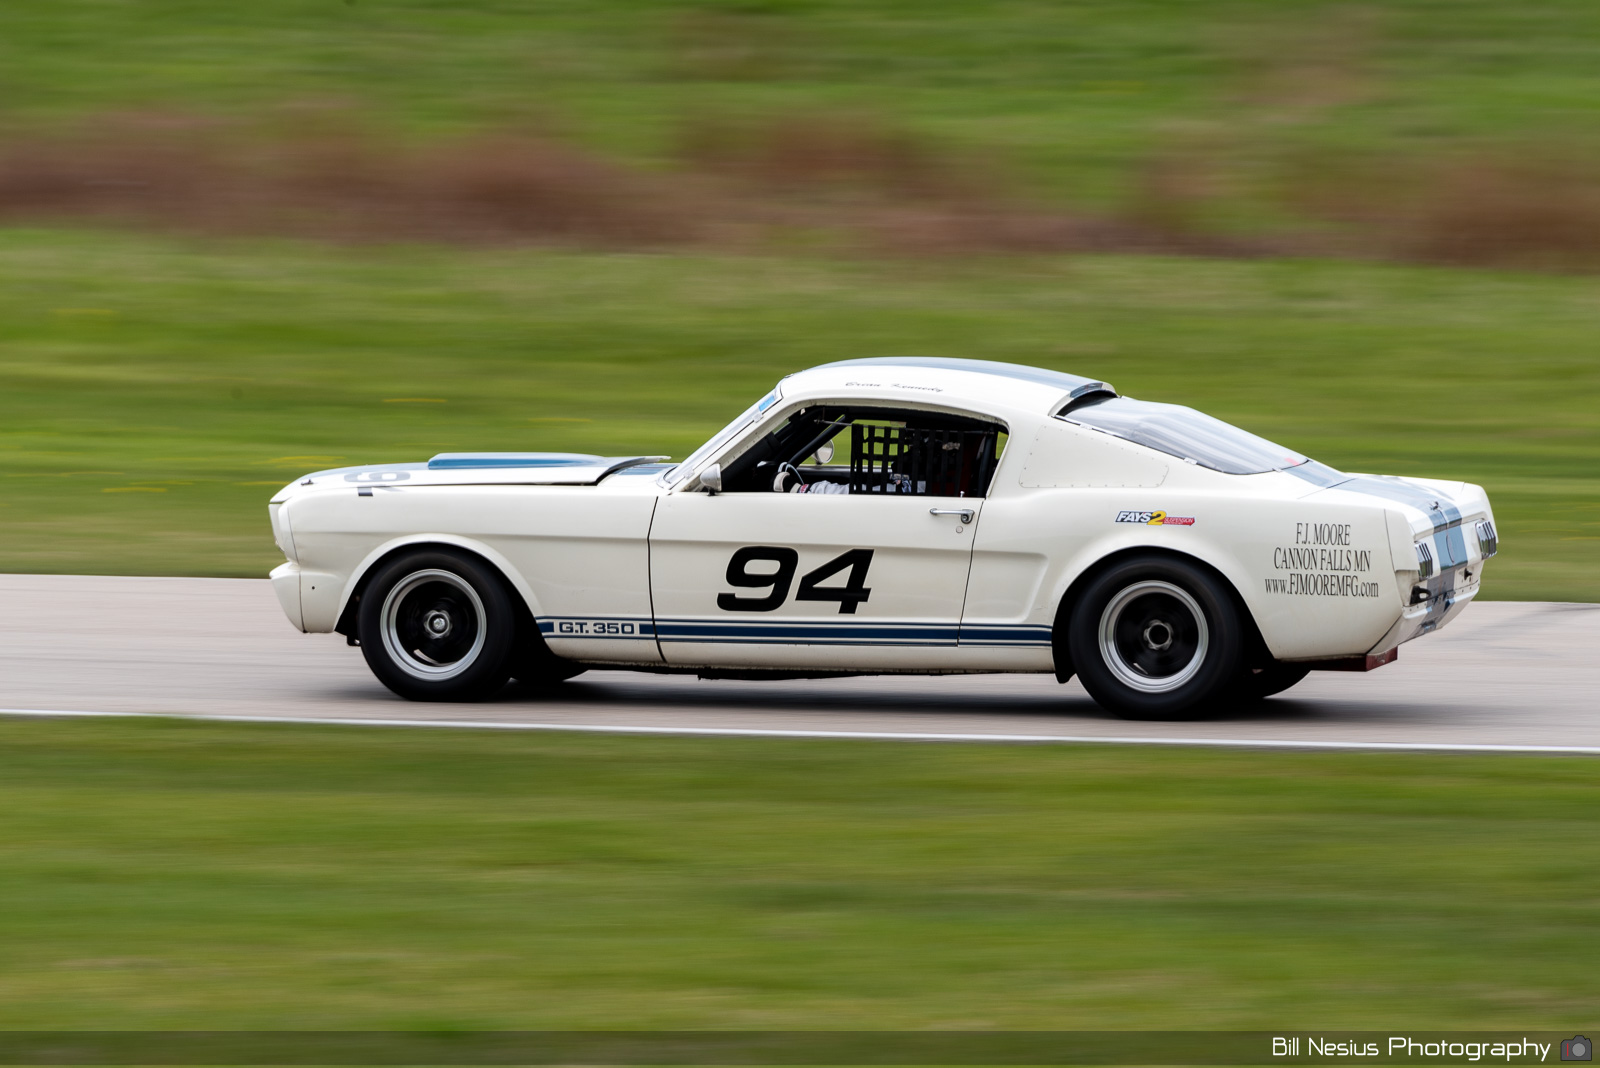 1966 Ford Mustang Shelby GT350 Number 94 / BAN_9762 / 3